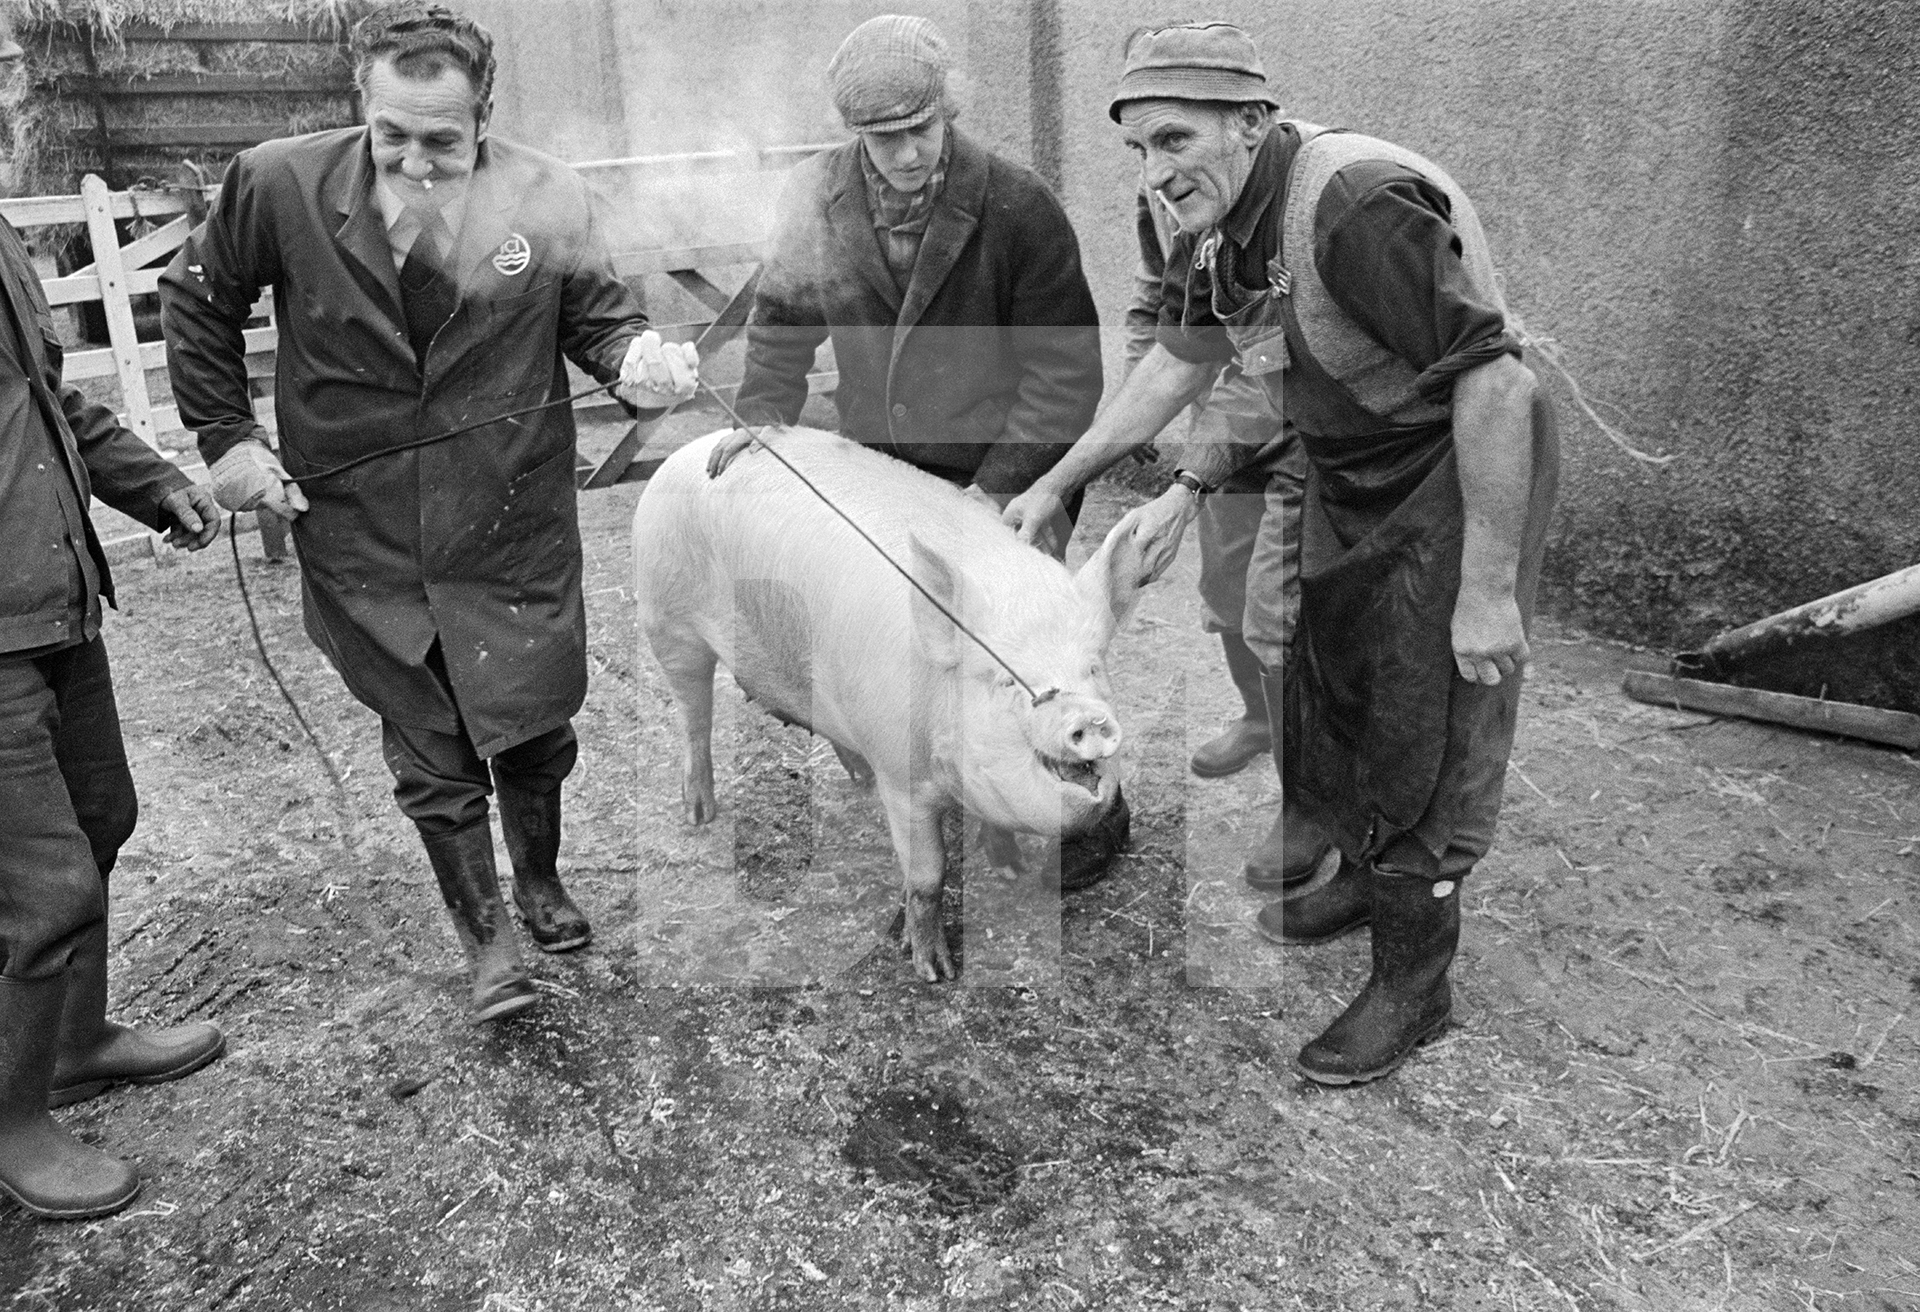 Leading the pig out into the yard. North Yorkshire 1976 by Daniel Meadows